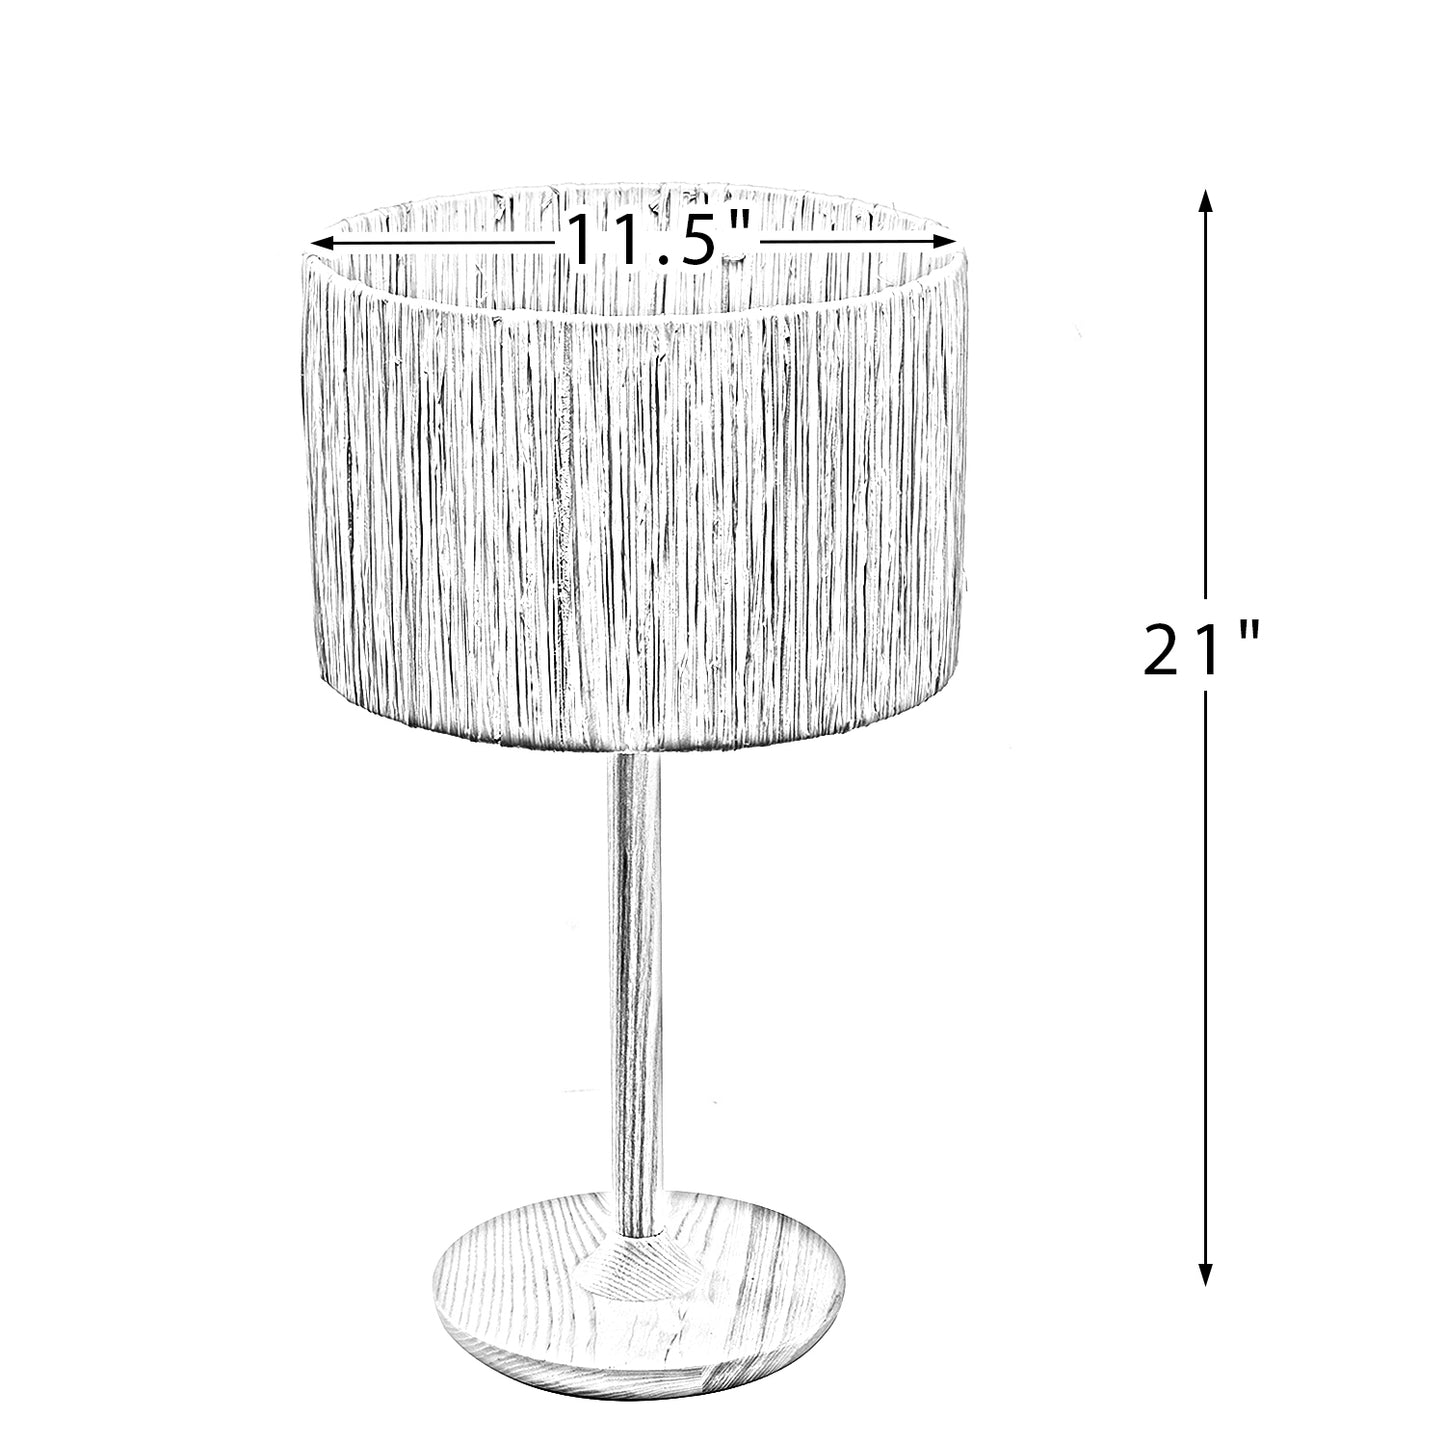 Thebae Solid Wood 21.3" Table Lamp with In-line Switch Control and Grass Made-Up Lampshade